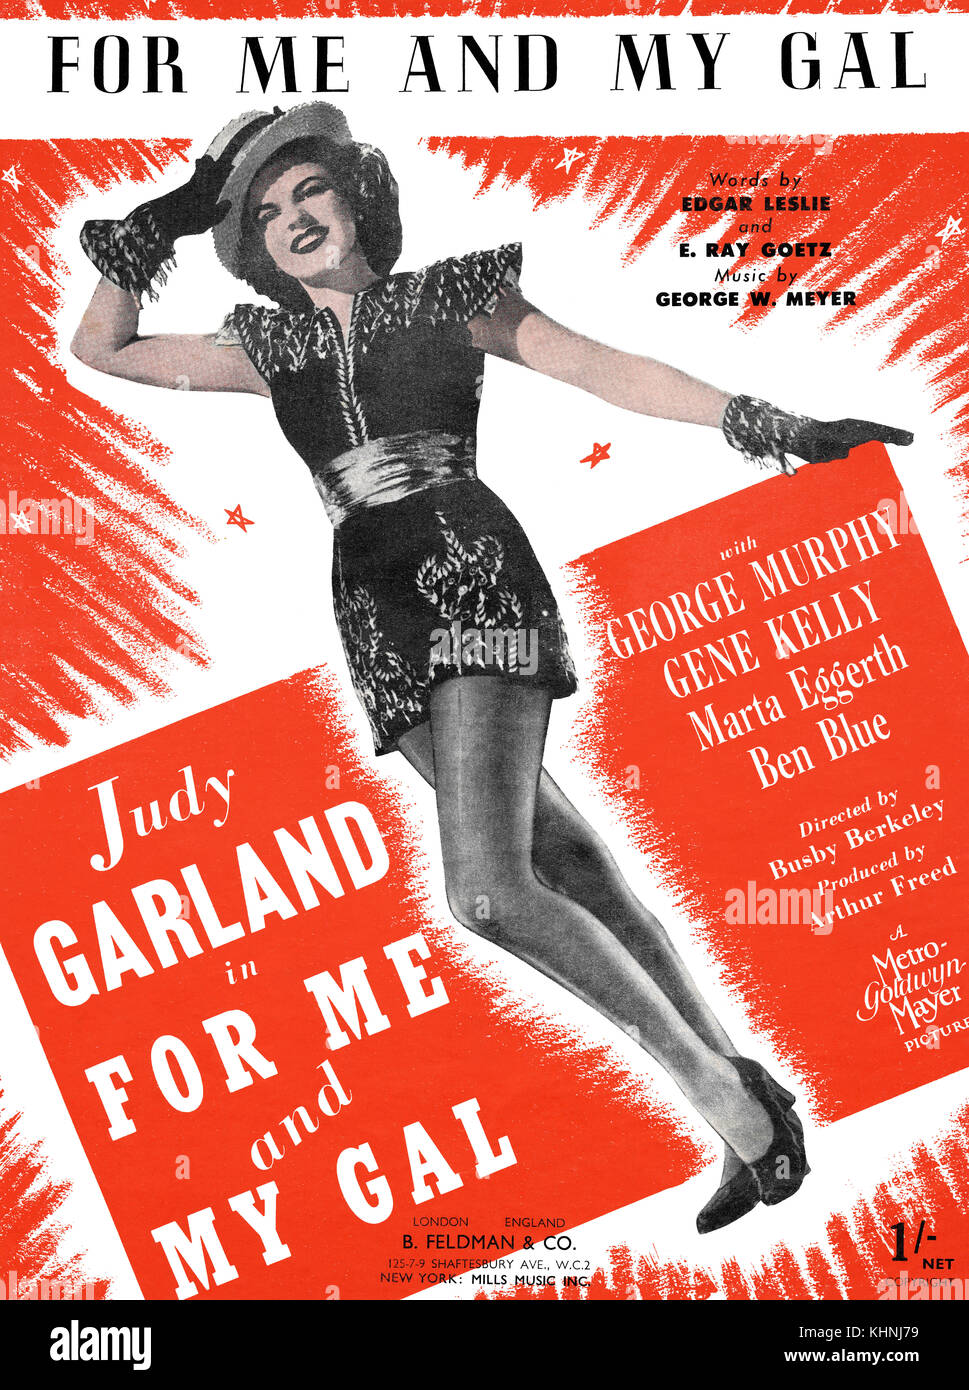 Vintage sheet music for For Me And My Gal, from the 1942 musical of the same name starring Judy Garland. Stock Photo